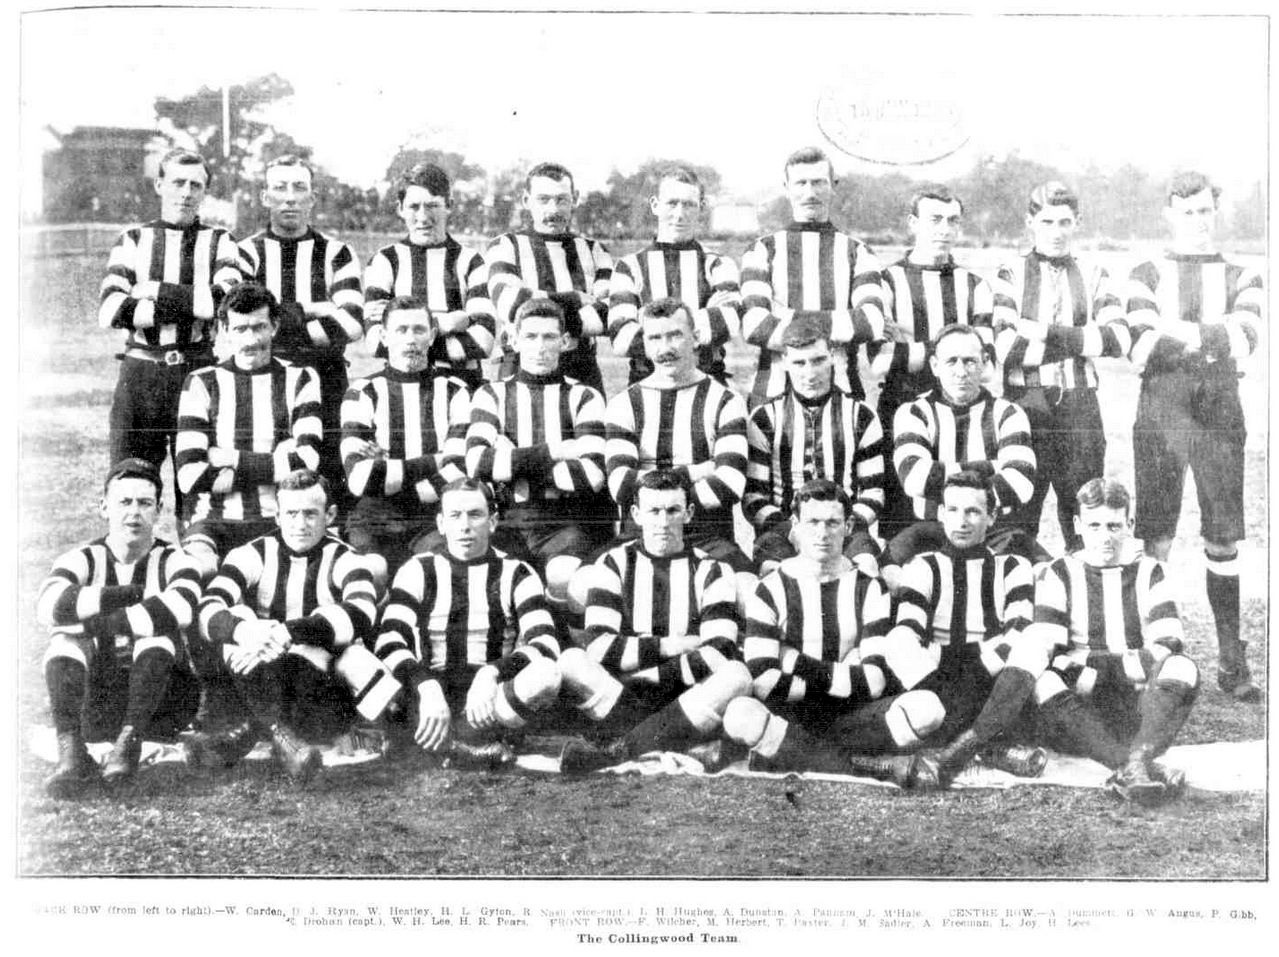 Team photo of the Collingwood Magpies from the Weekly Times on 13 June, 1908.